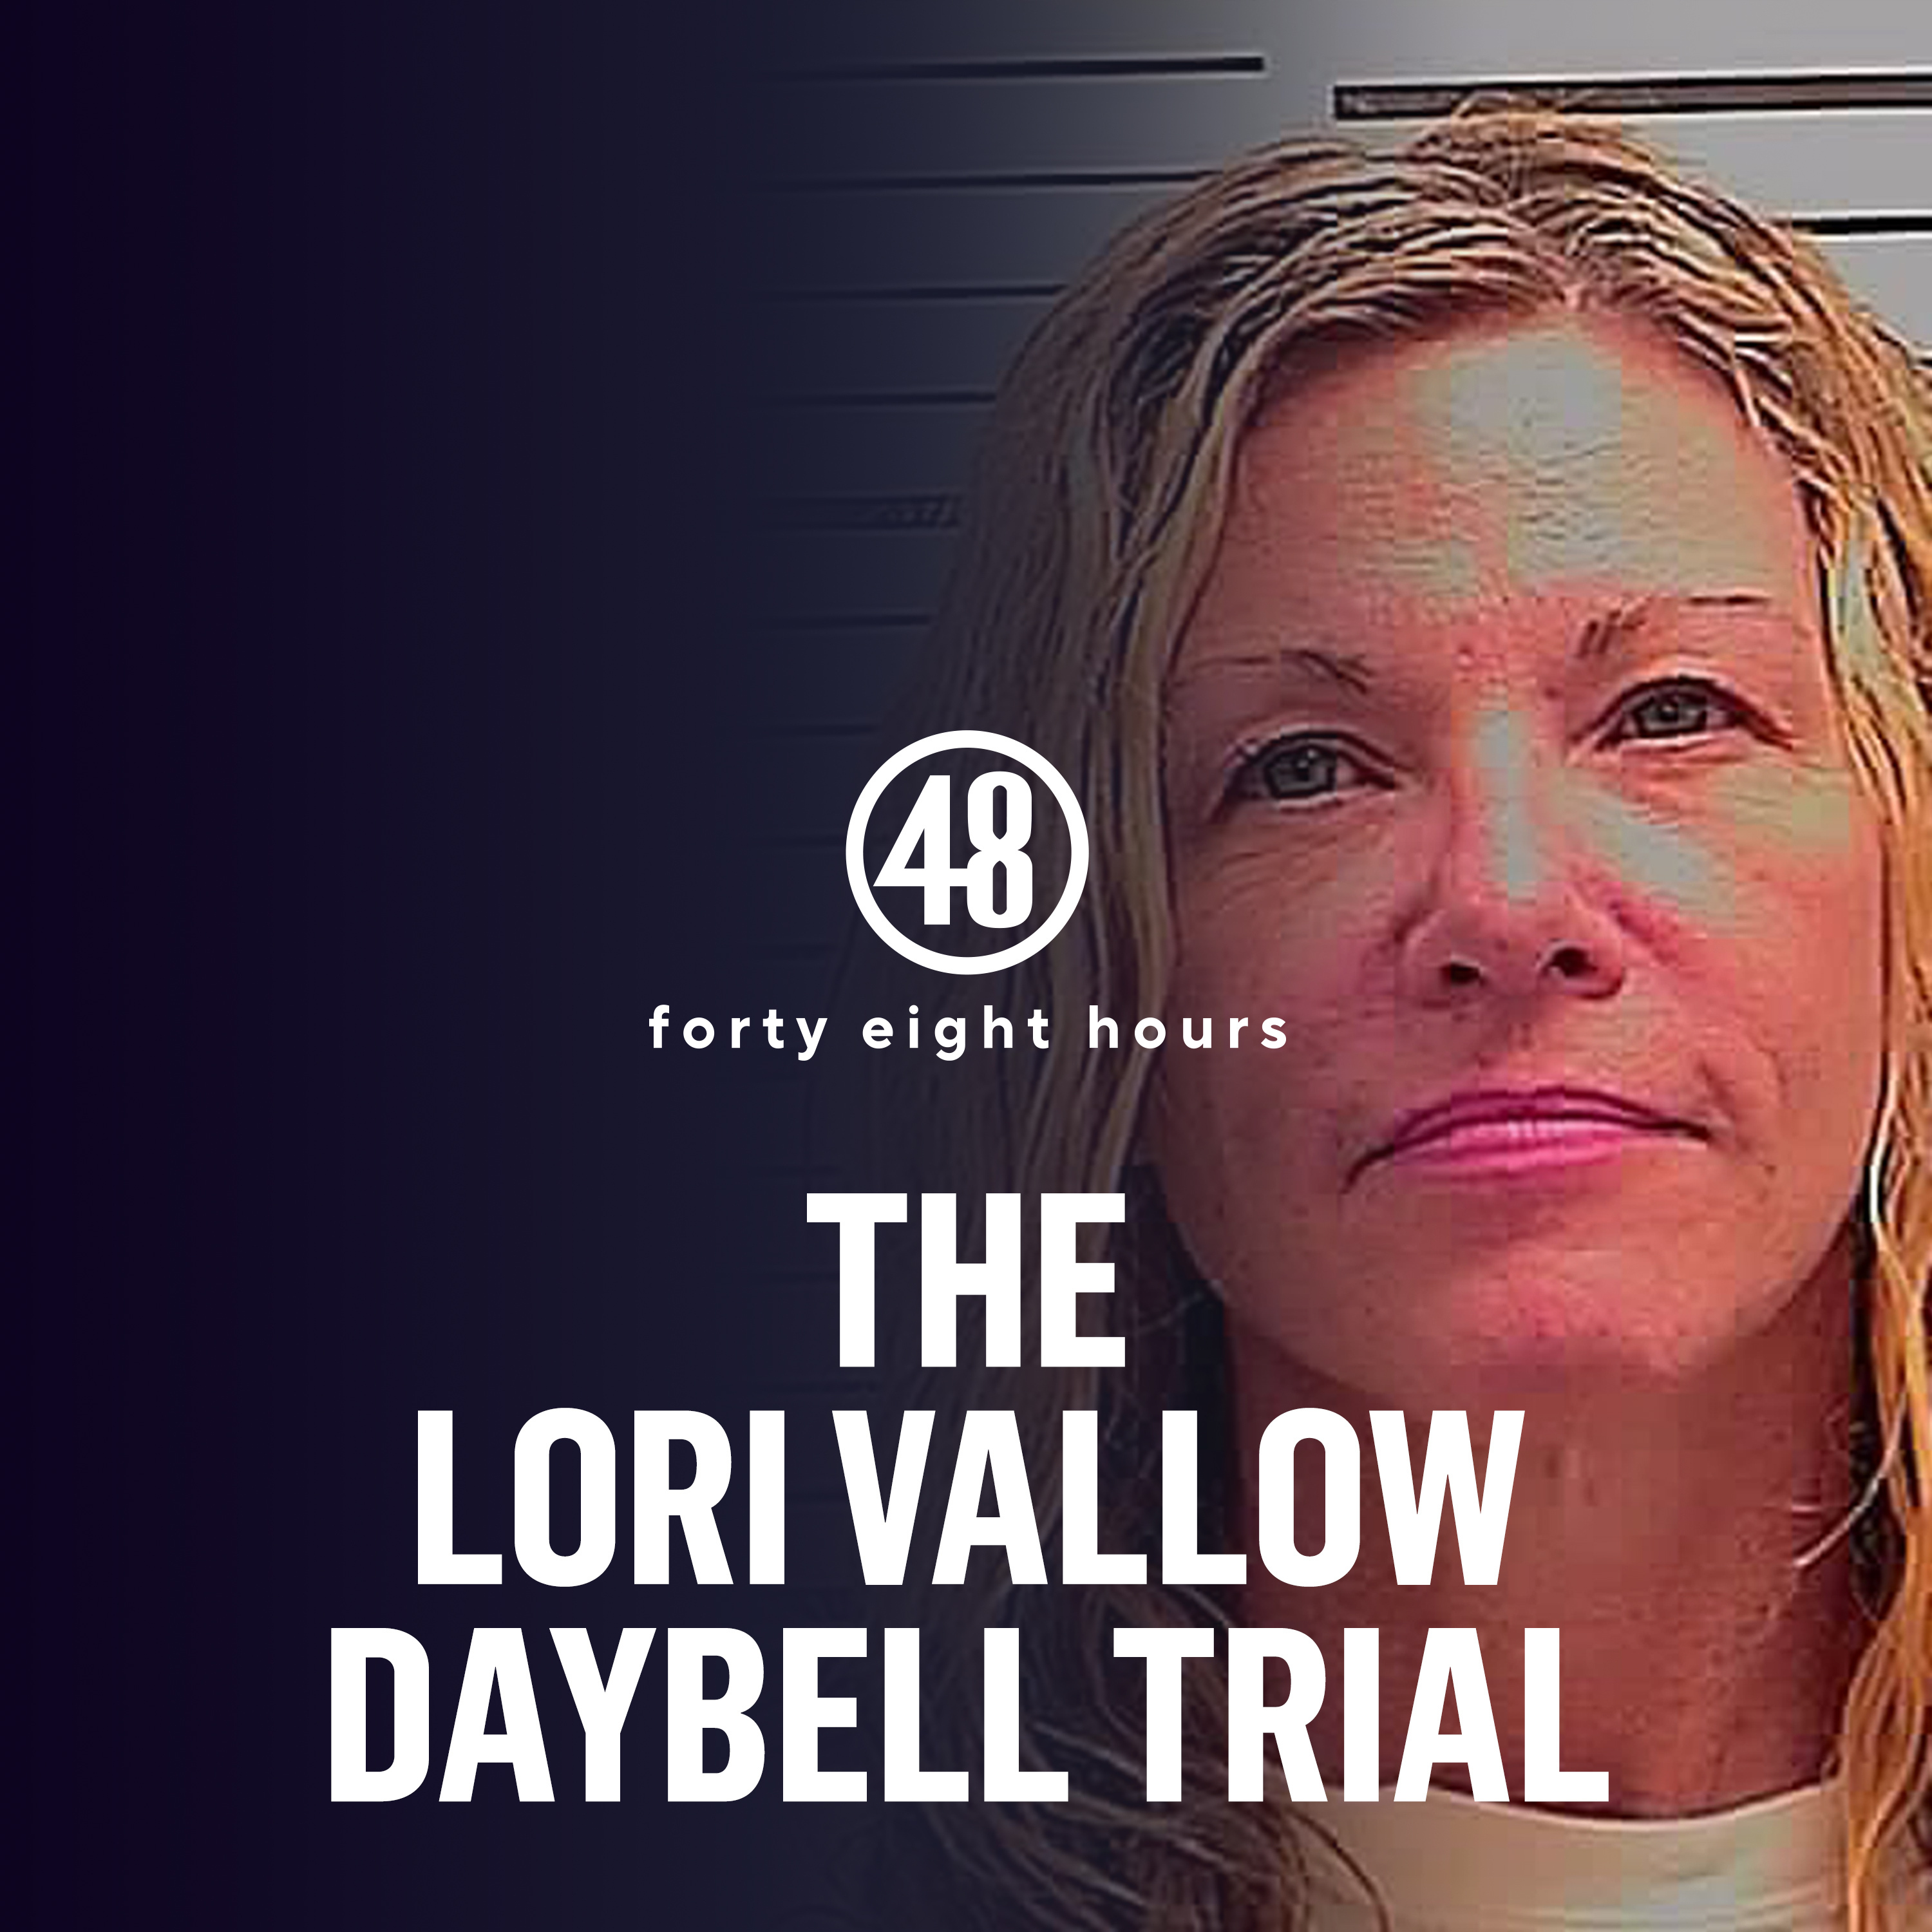 Lori Vallow Daybell: Guilty